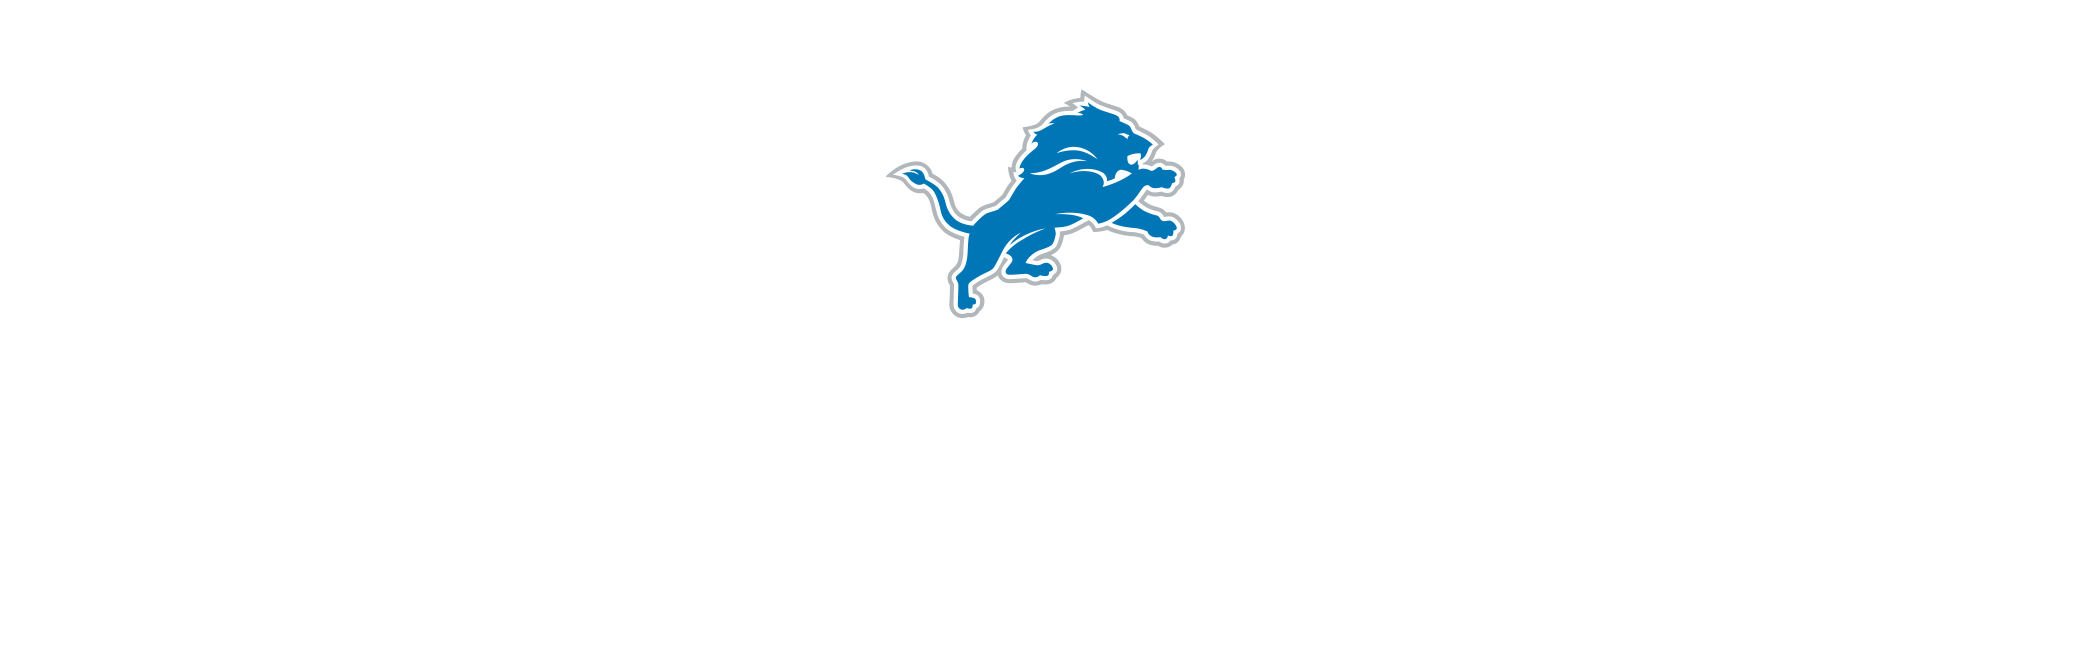 Detroit Lions gearing up to welcome fans back to Ford Field